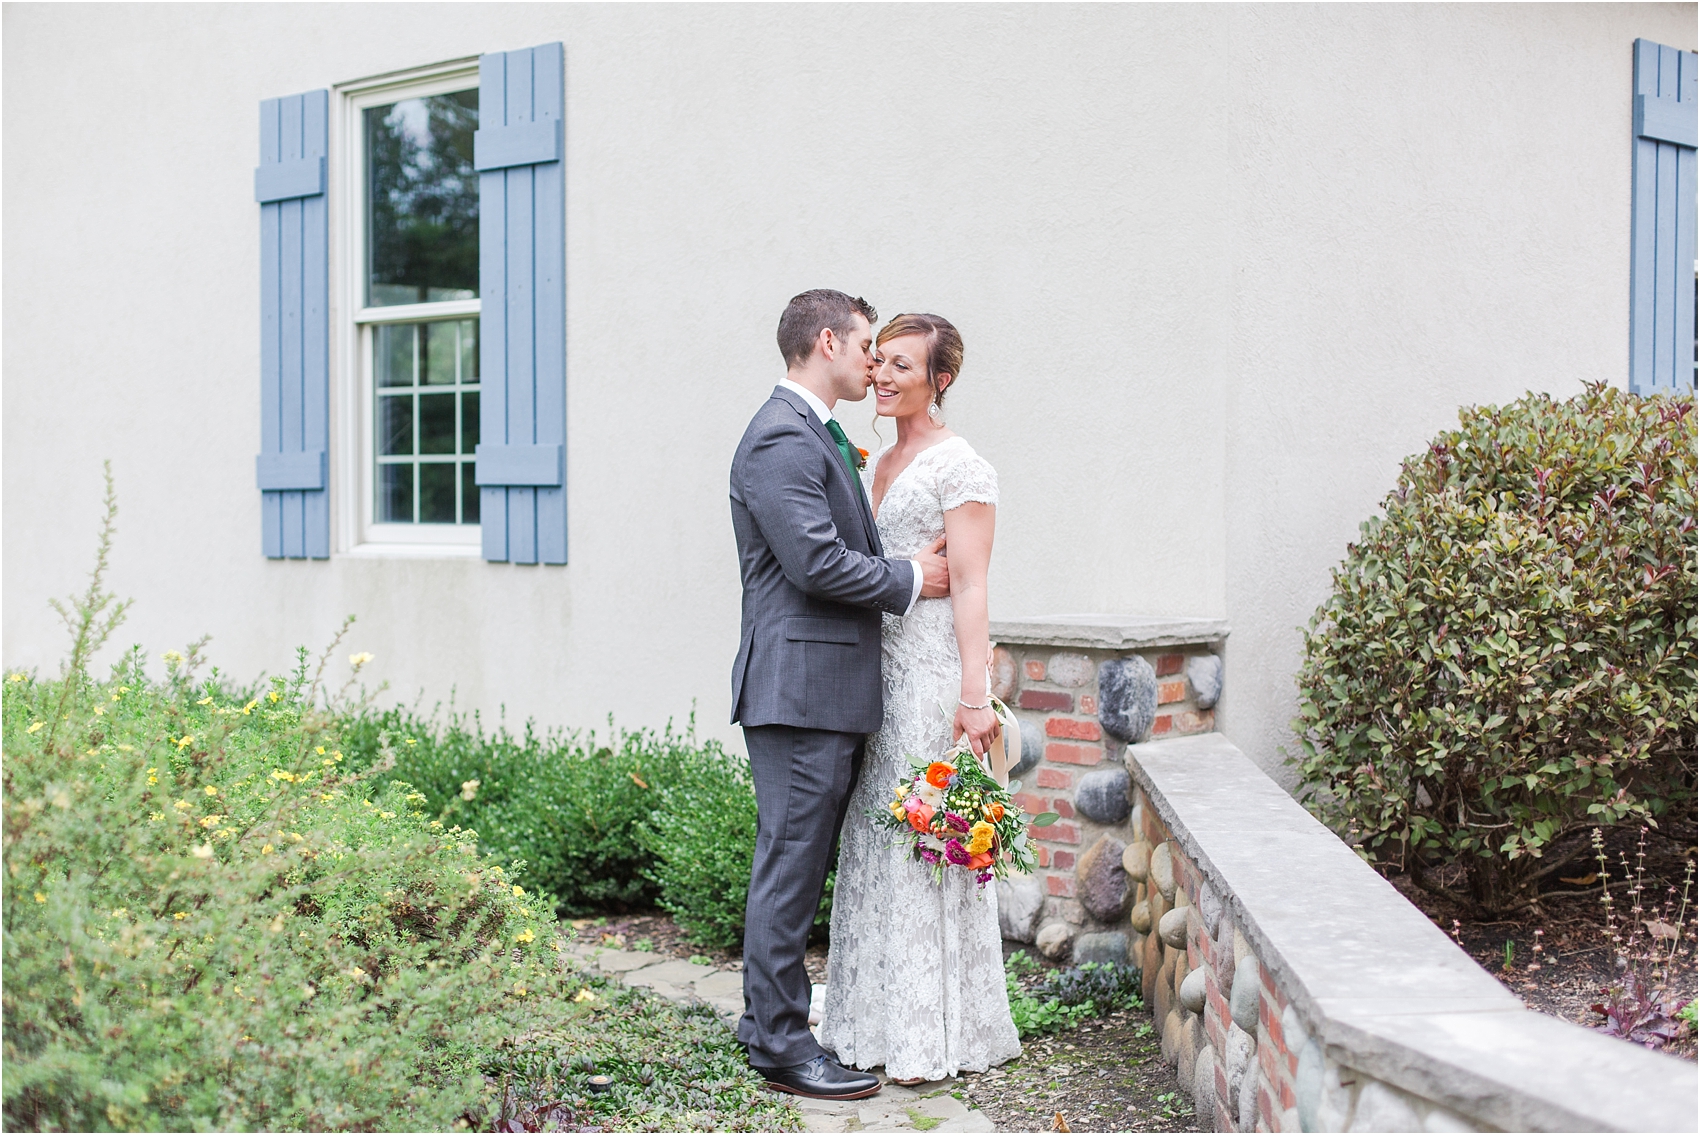 romantic-intimate-backyard-wedding-photos-at-private-estate-in-ann-arbor-mi-by-courtney-carolyn-photography_0073.jpg